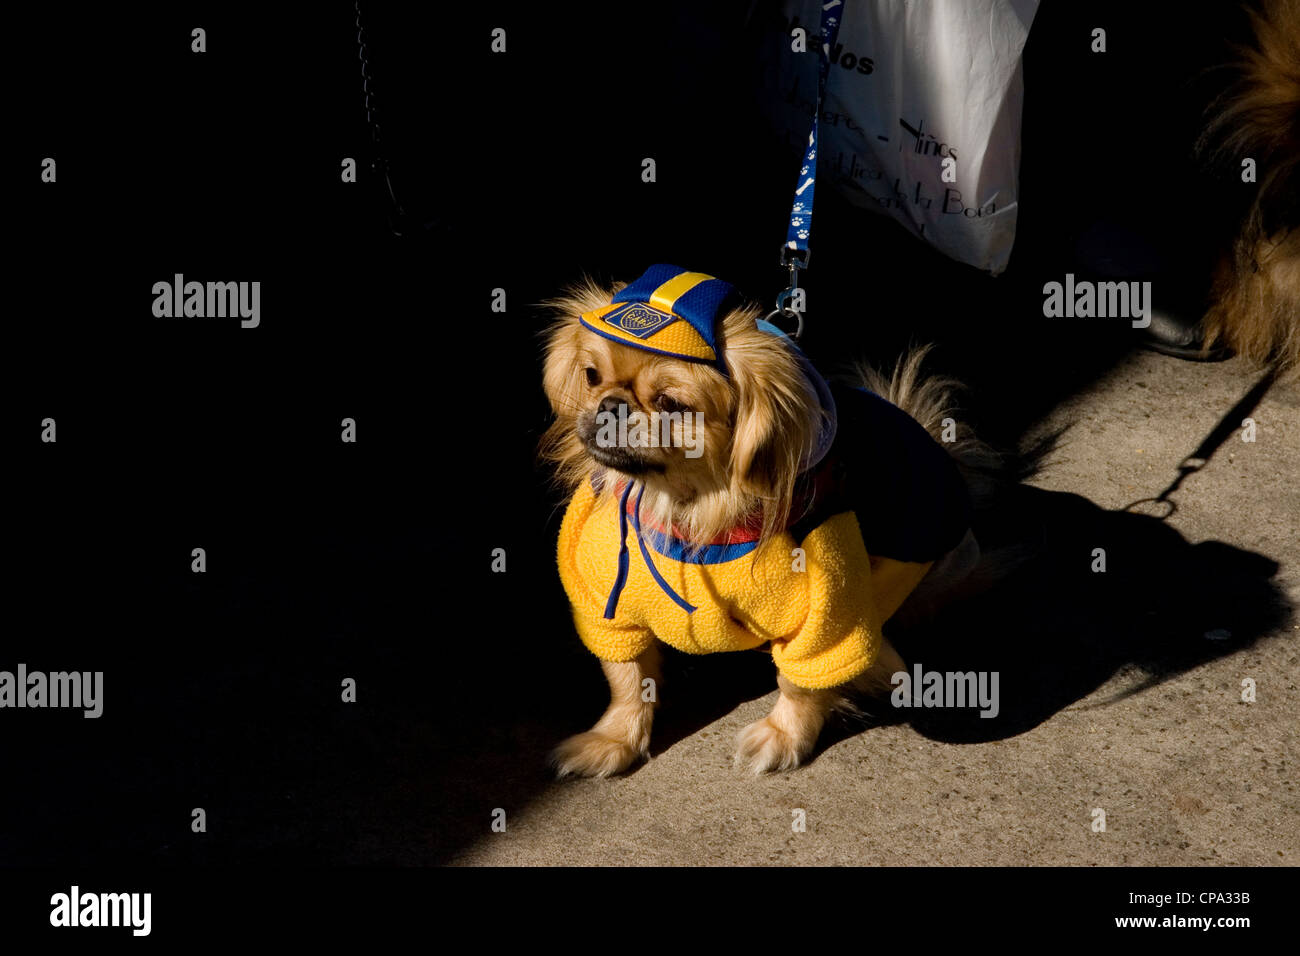 A dog in the colour's of the Argentinian football team Boca Juniors in the La Boca neighbourhood. Stock Photo